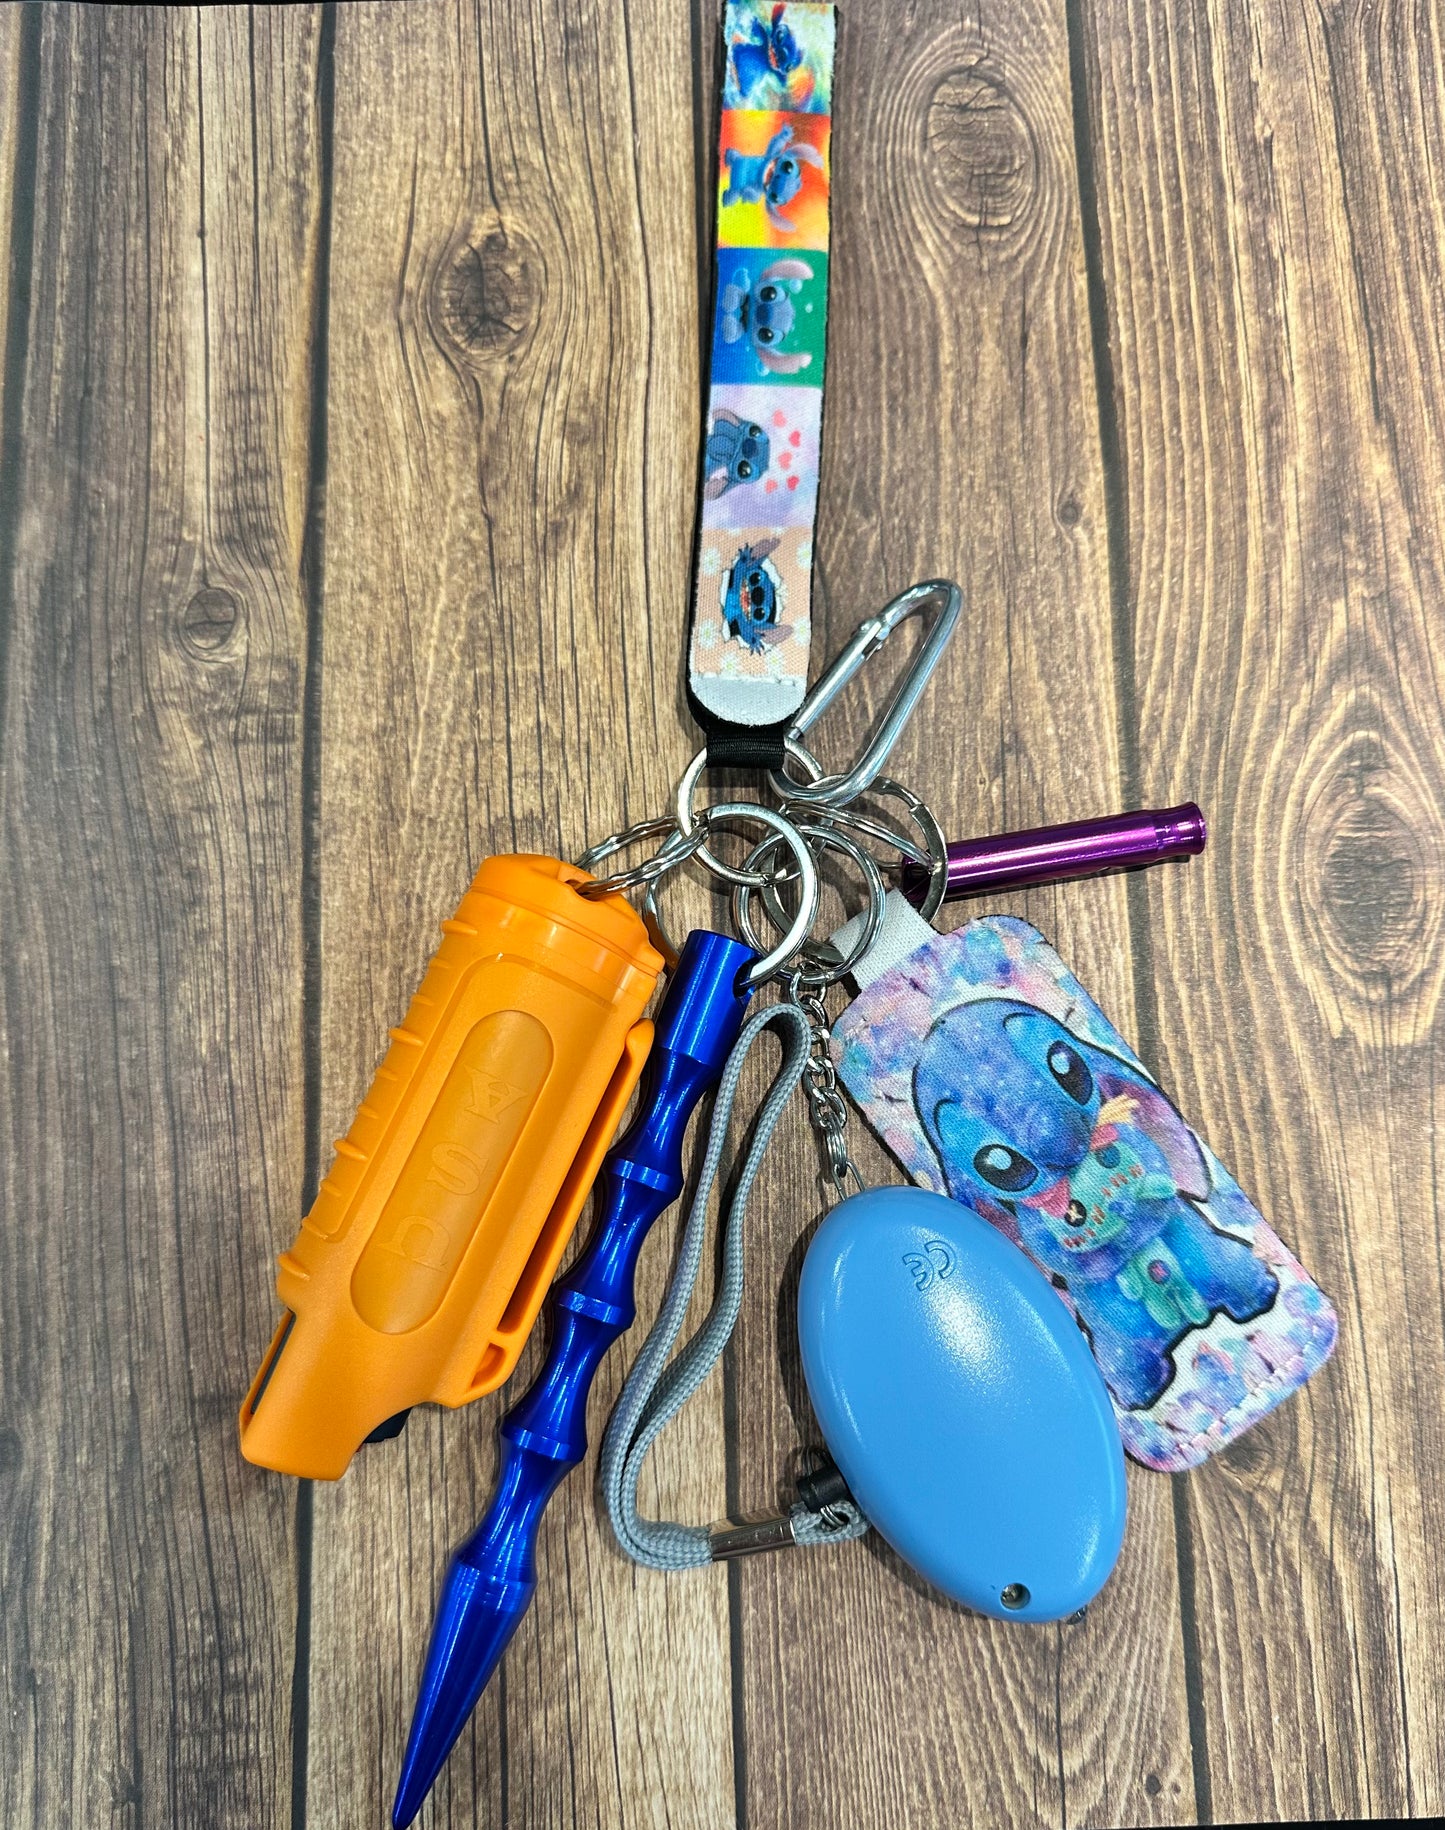 Fully loaded saftey keychain